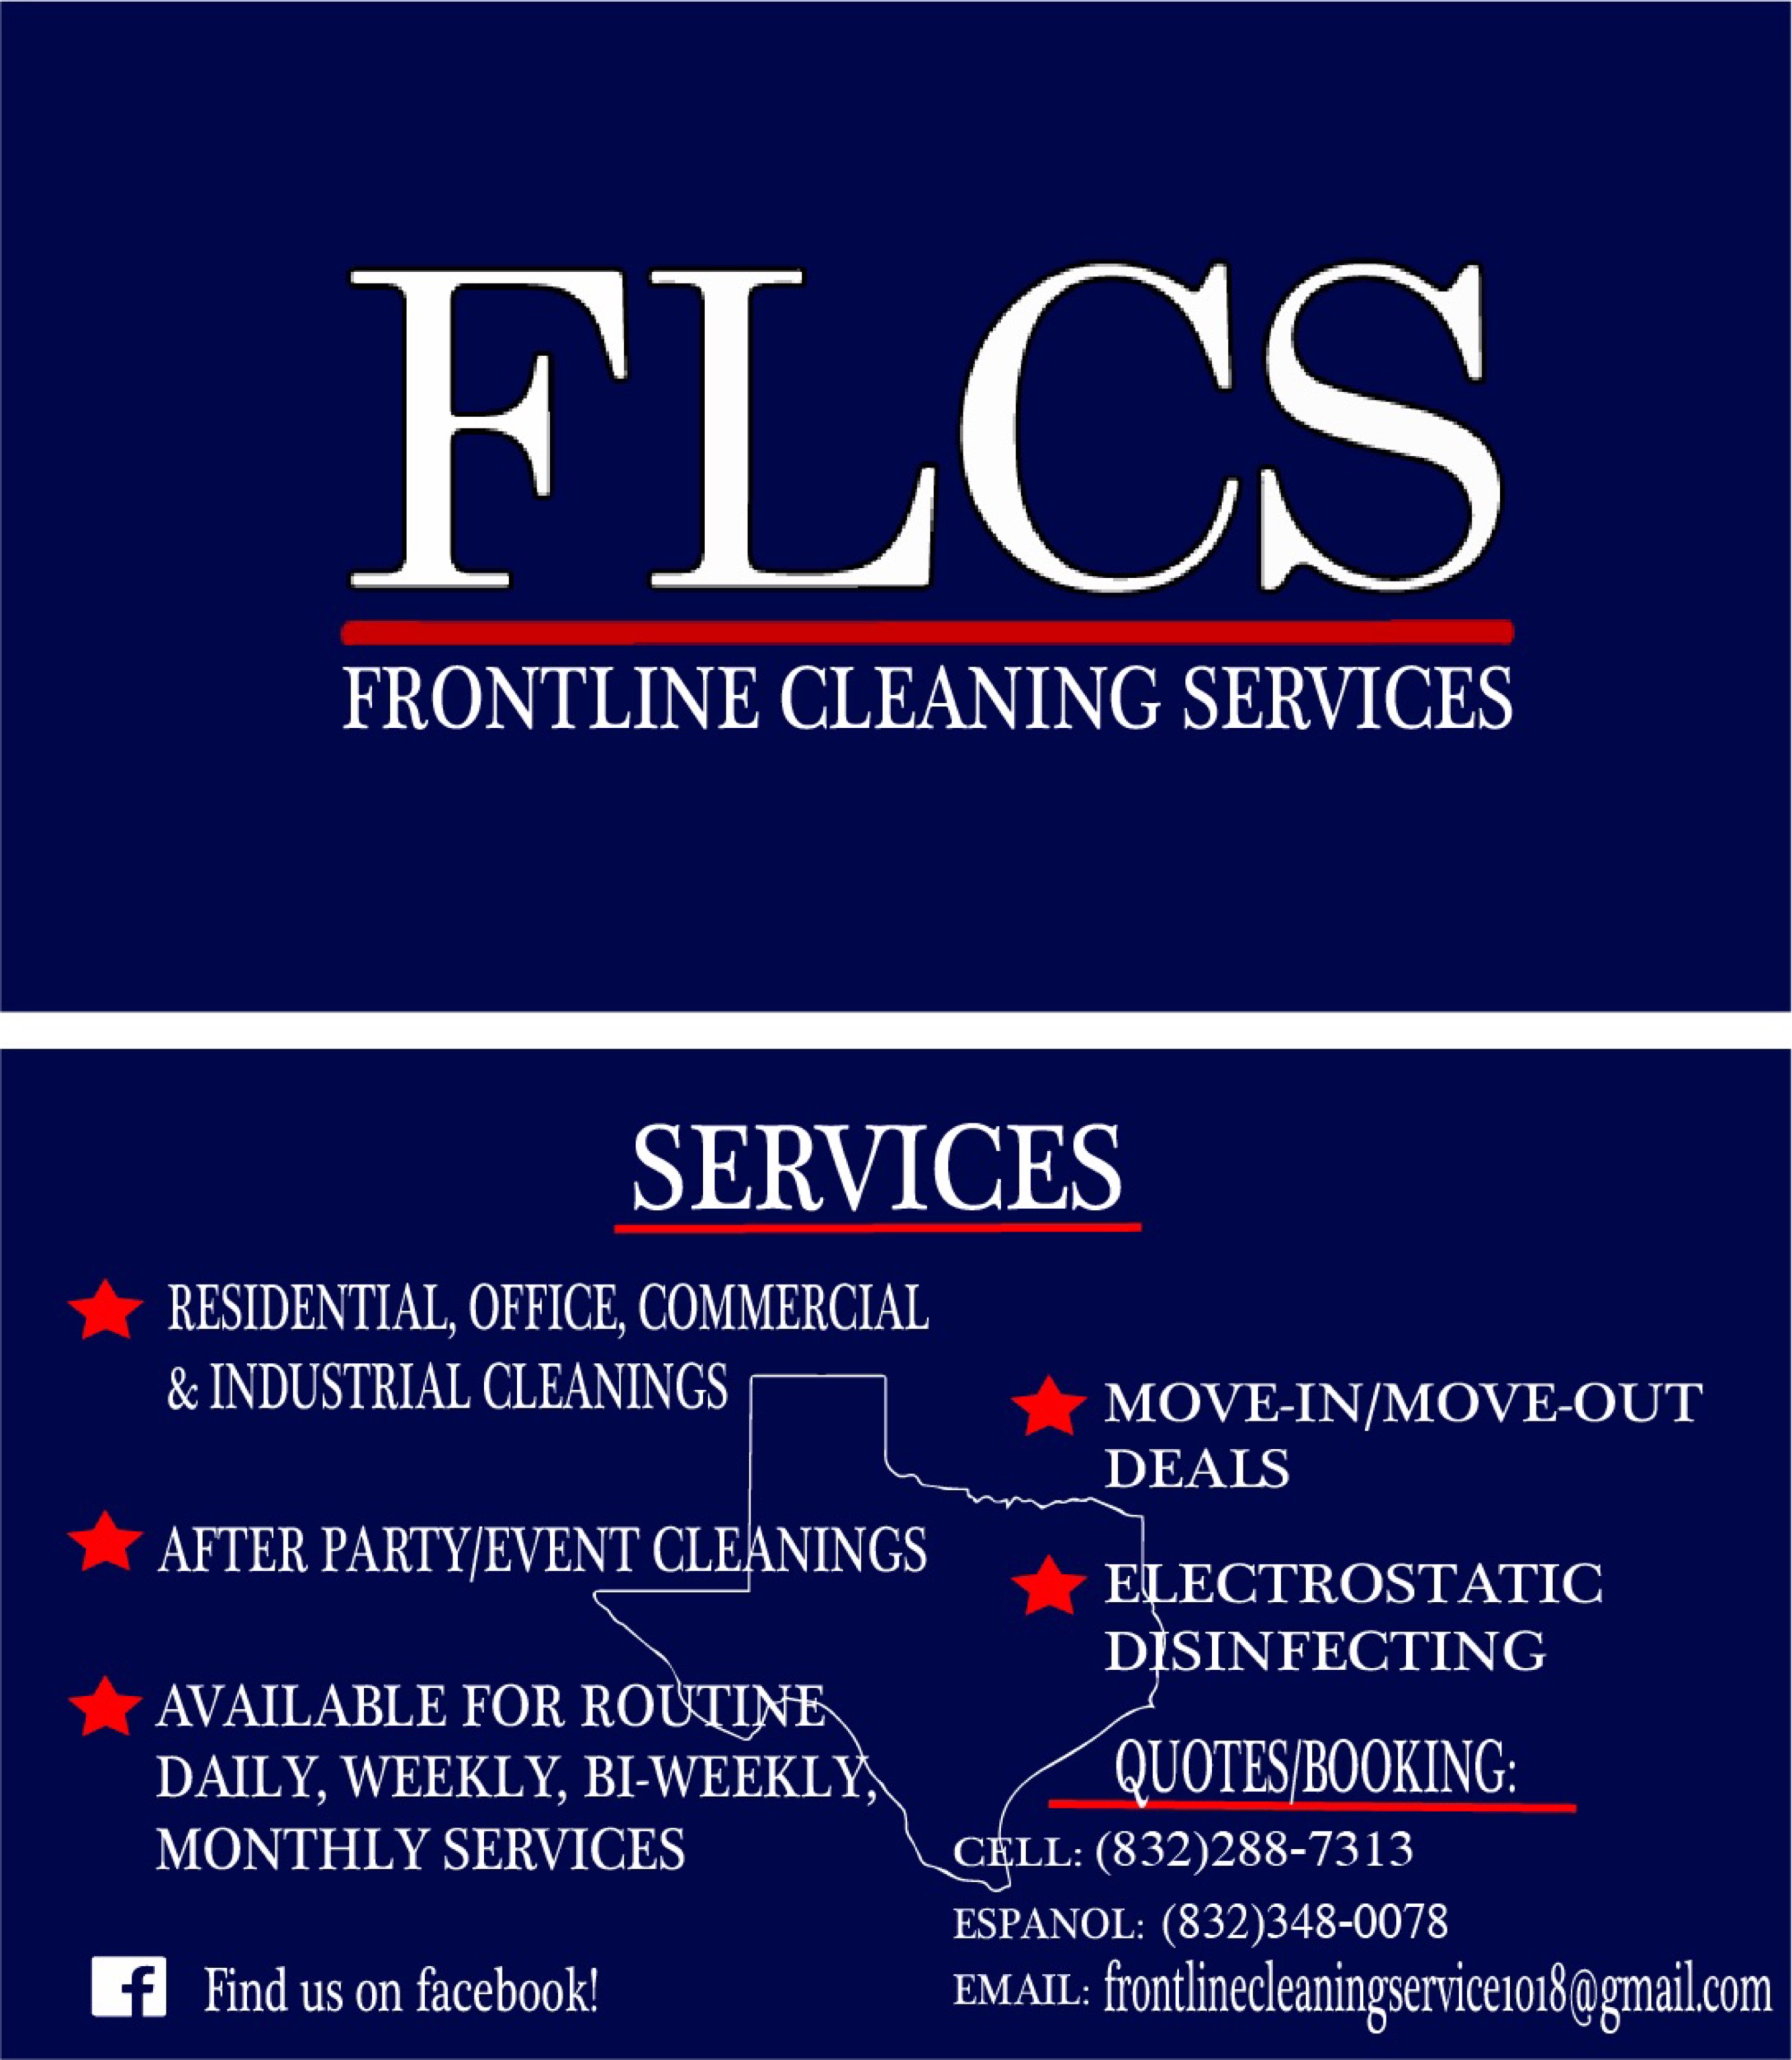 Frontline Cleaning Services Logo